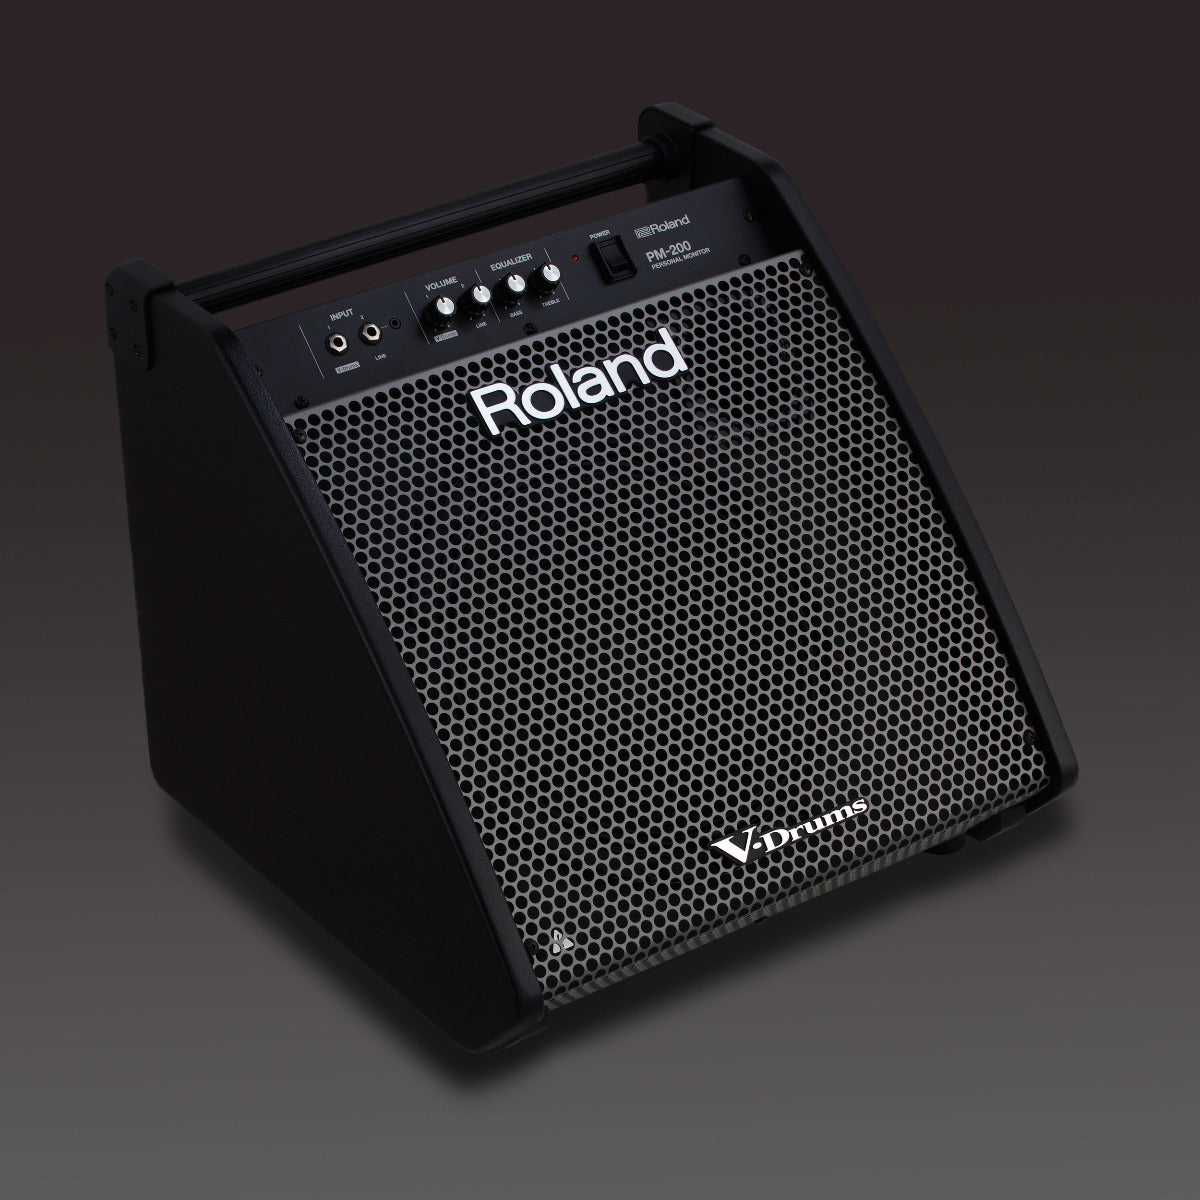 Roland PM-200 Personal V-Drums Monitor